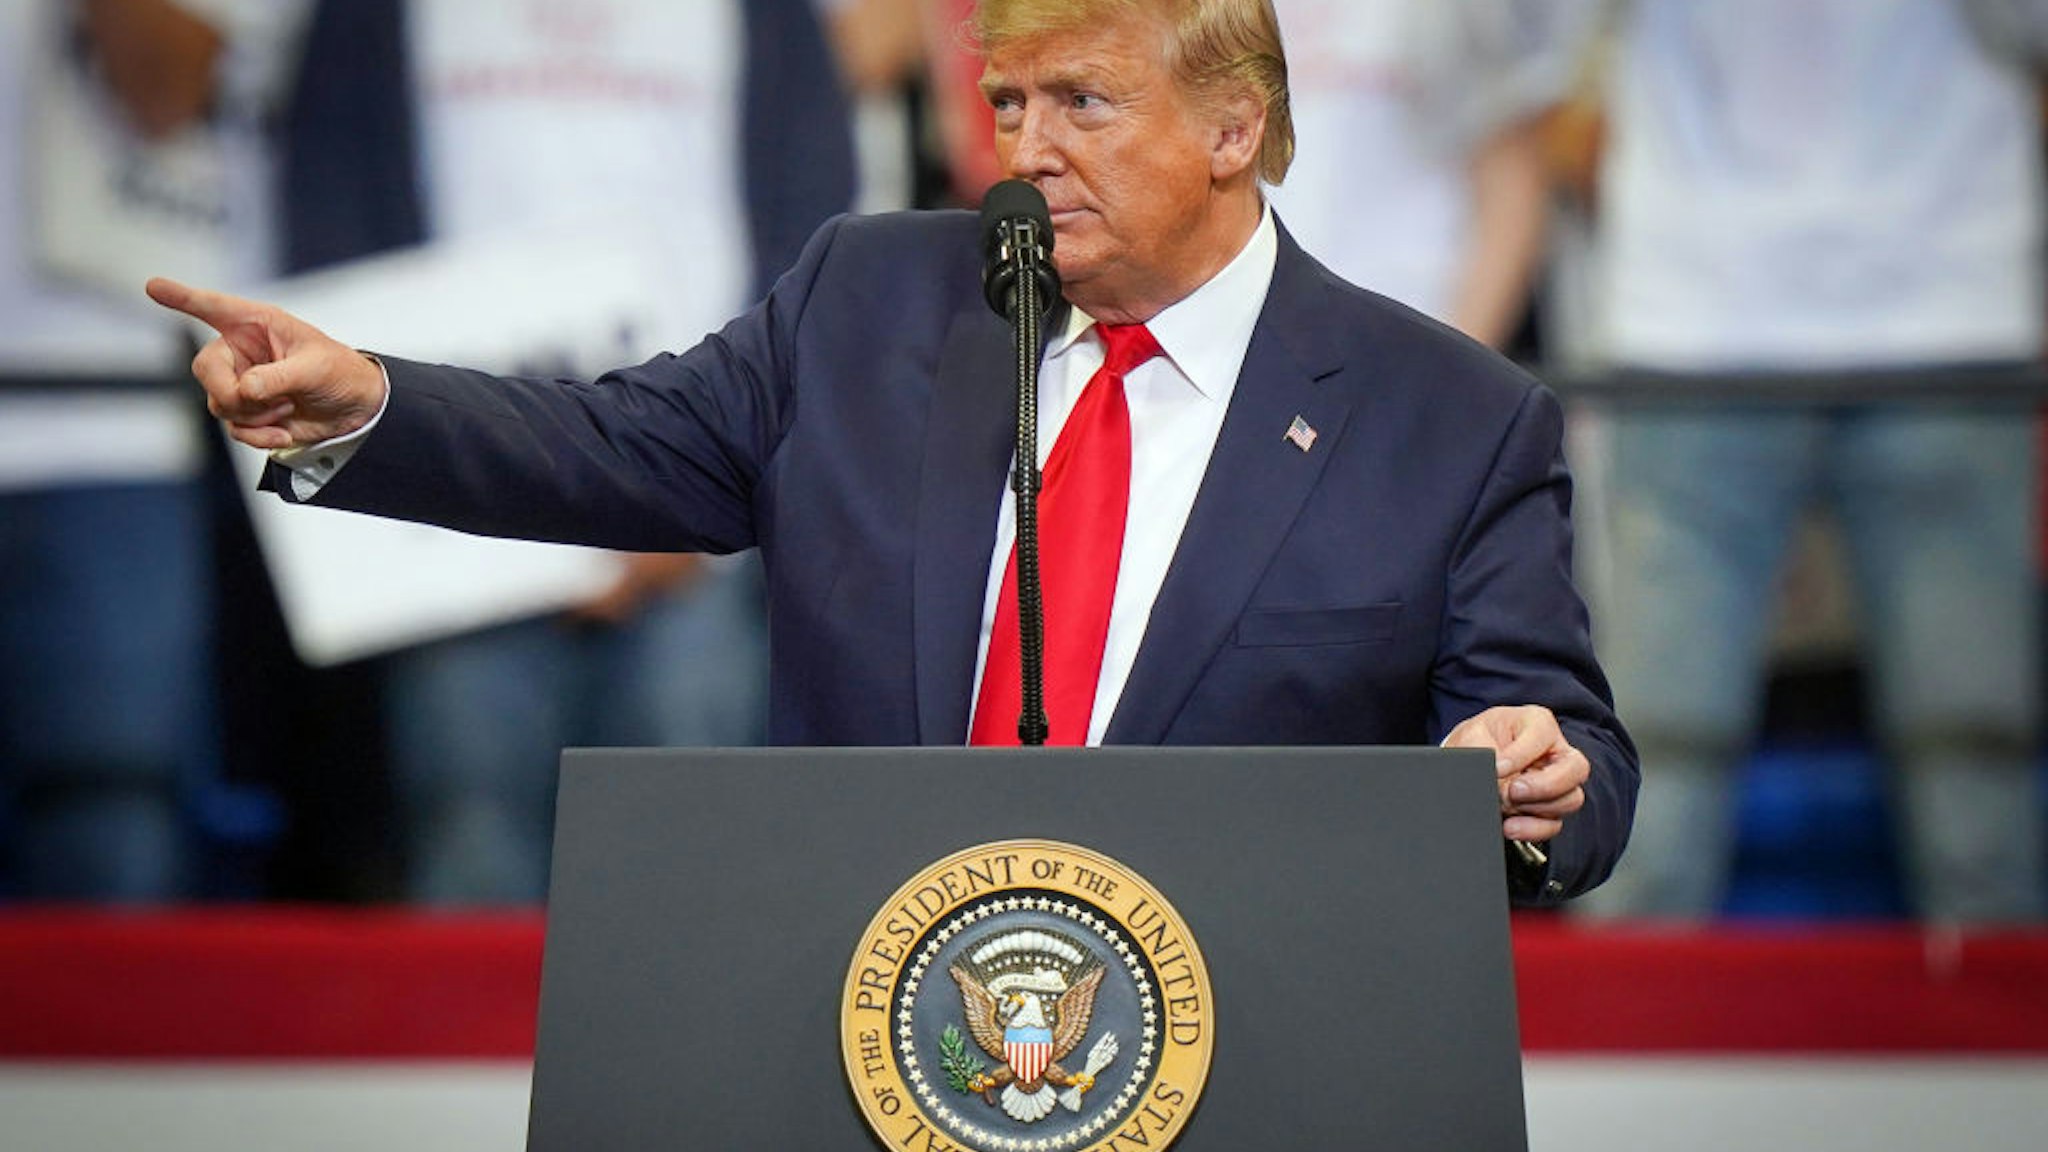 LEXINGTON, KY - NOVEMBER 04: U.S. President Donald Trump speaks during a campaign rally at the Rupp Arena on November 4, 2019 in Lexington, Kentucky. The president was visiting Kentucky the day before Election Day in support of Republican Gov. Matt Bevin.